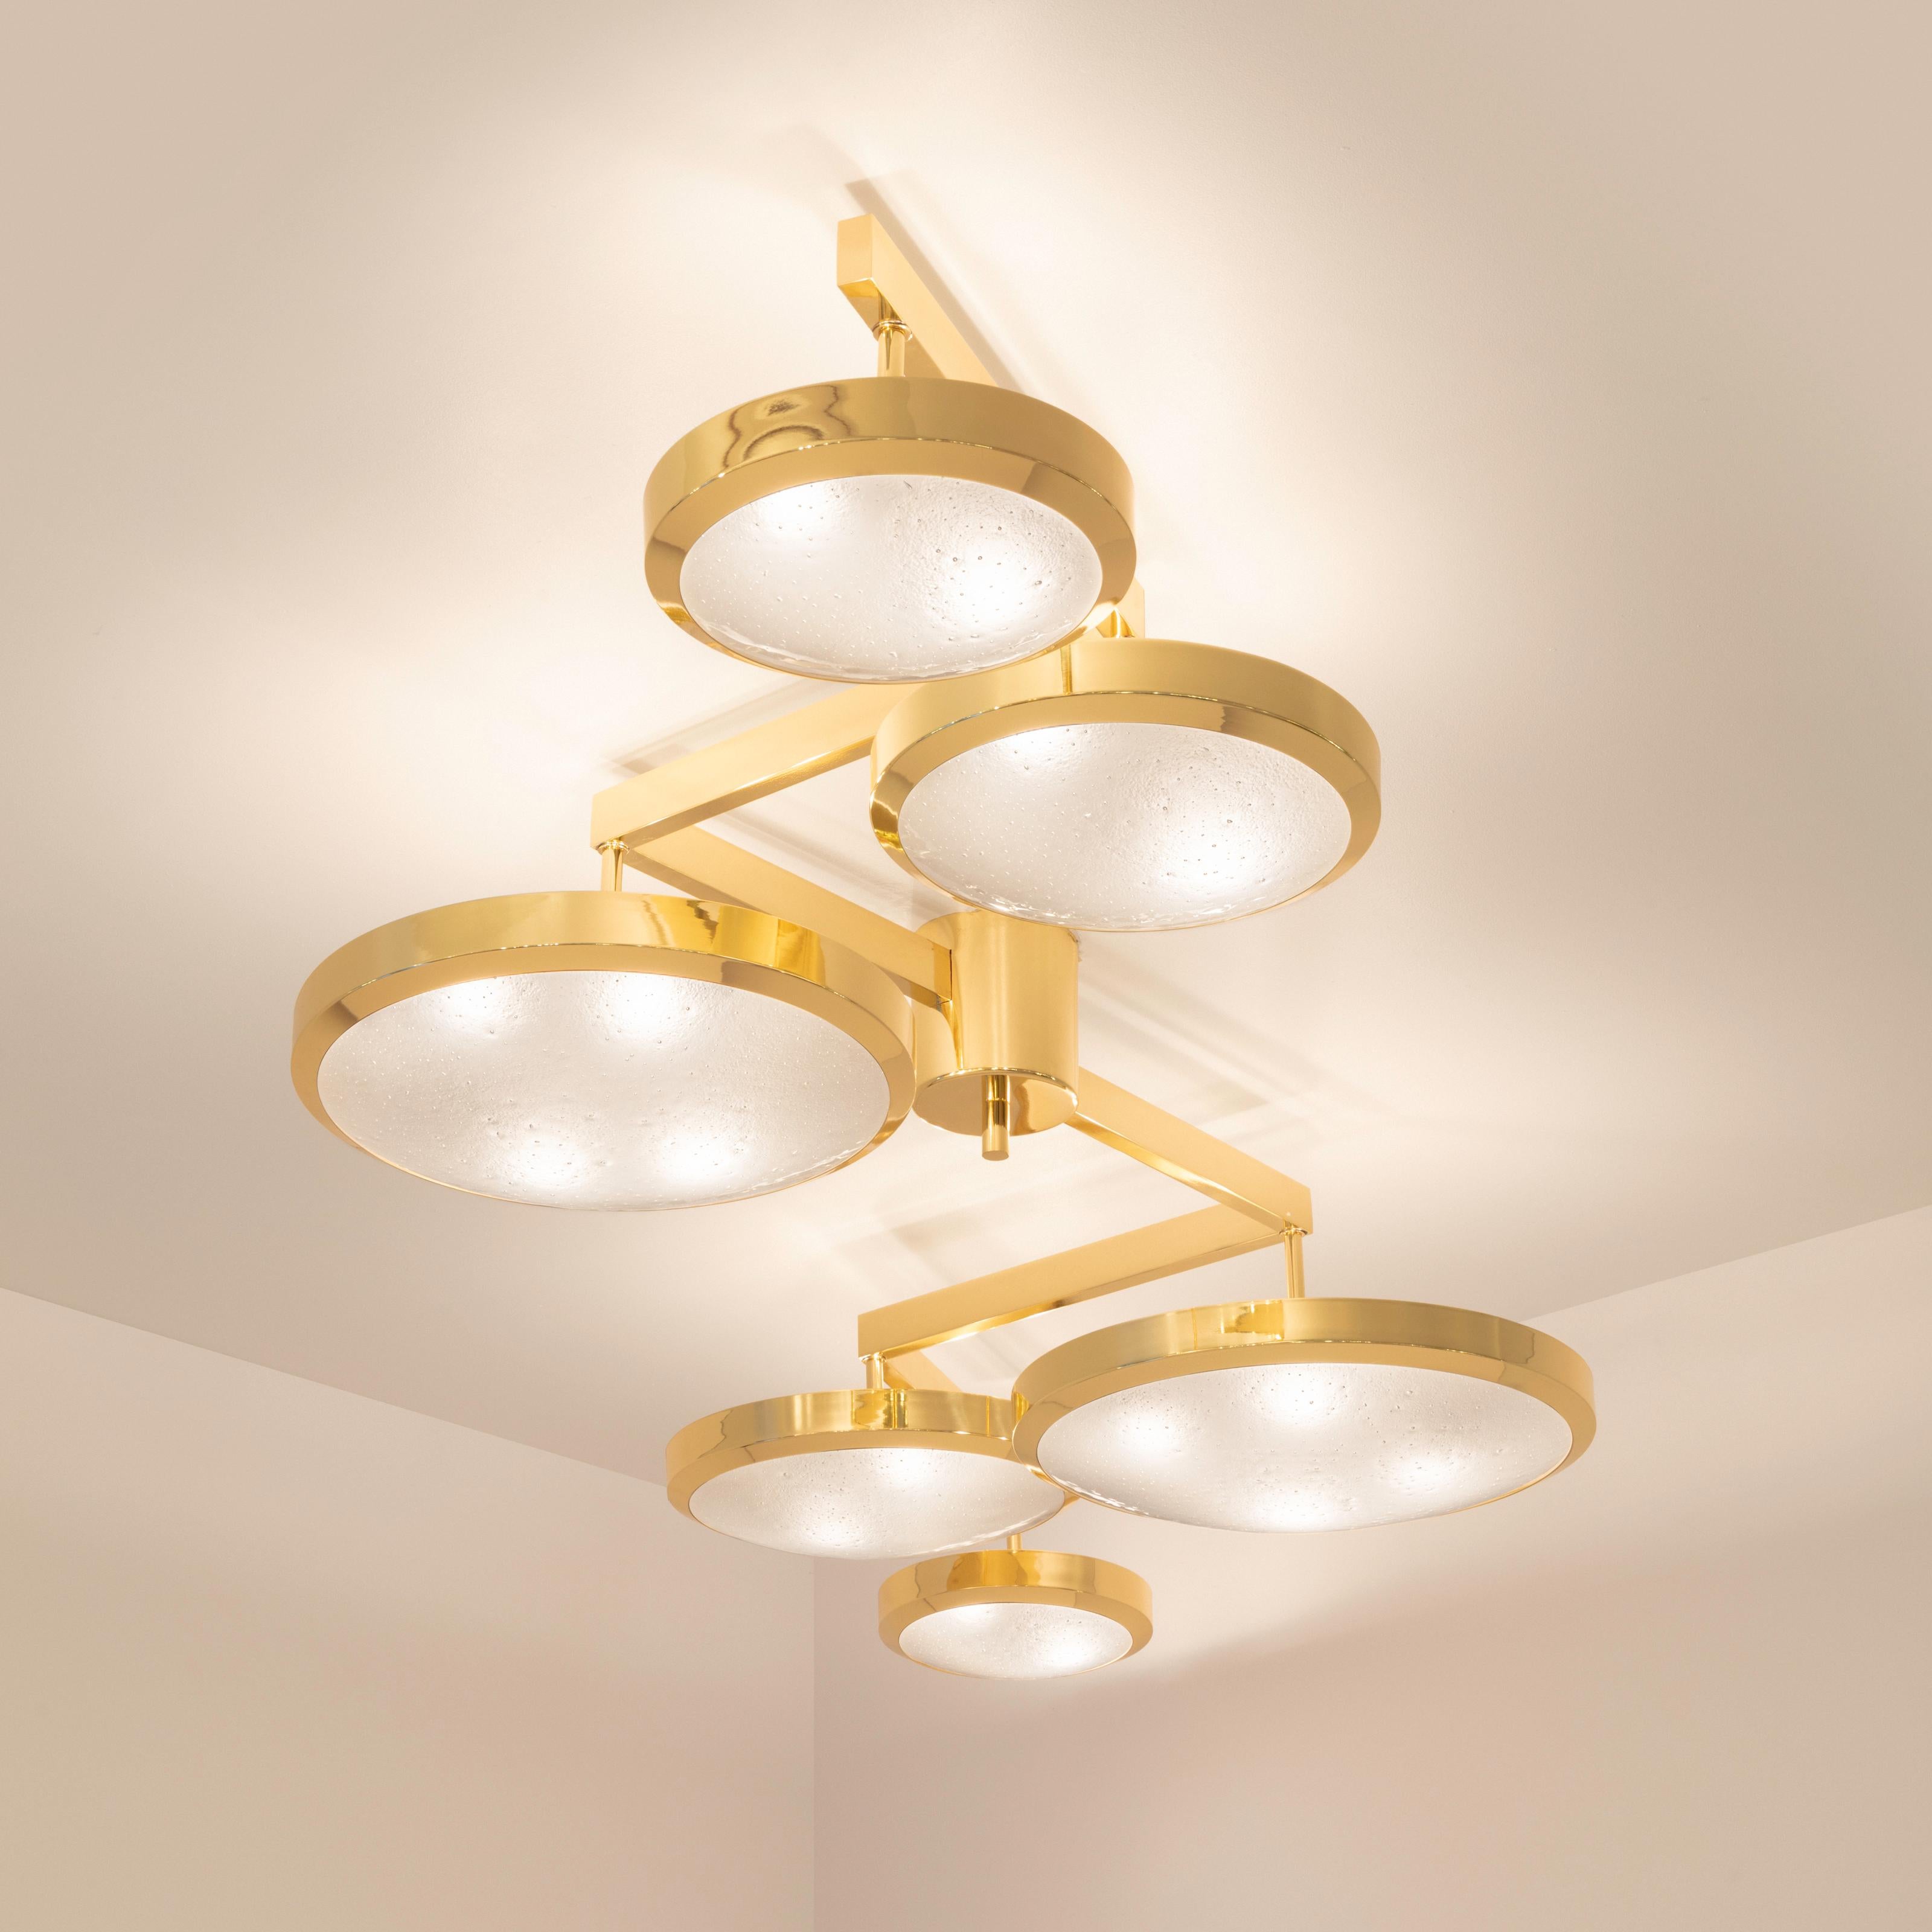 Geometria Sospesa Ceiling Light by Gaspare Asaro-Bronze Finish In New Condition For Sale In New York, NY